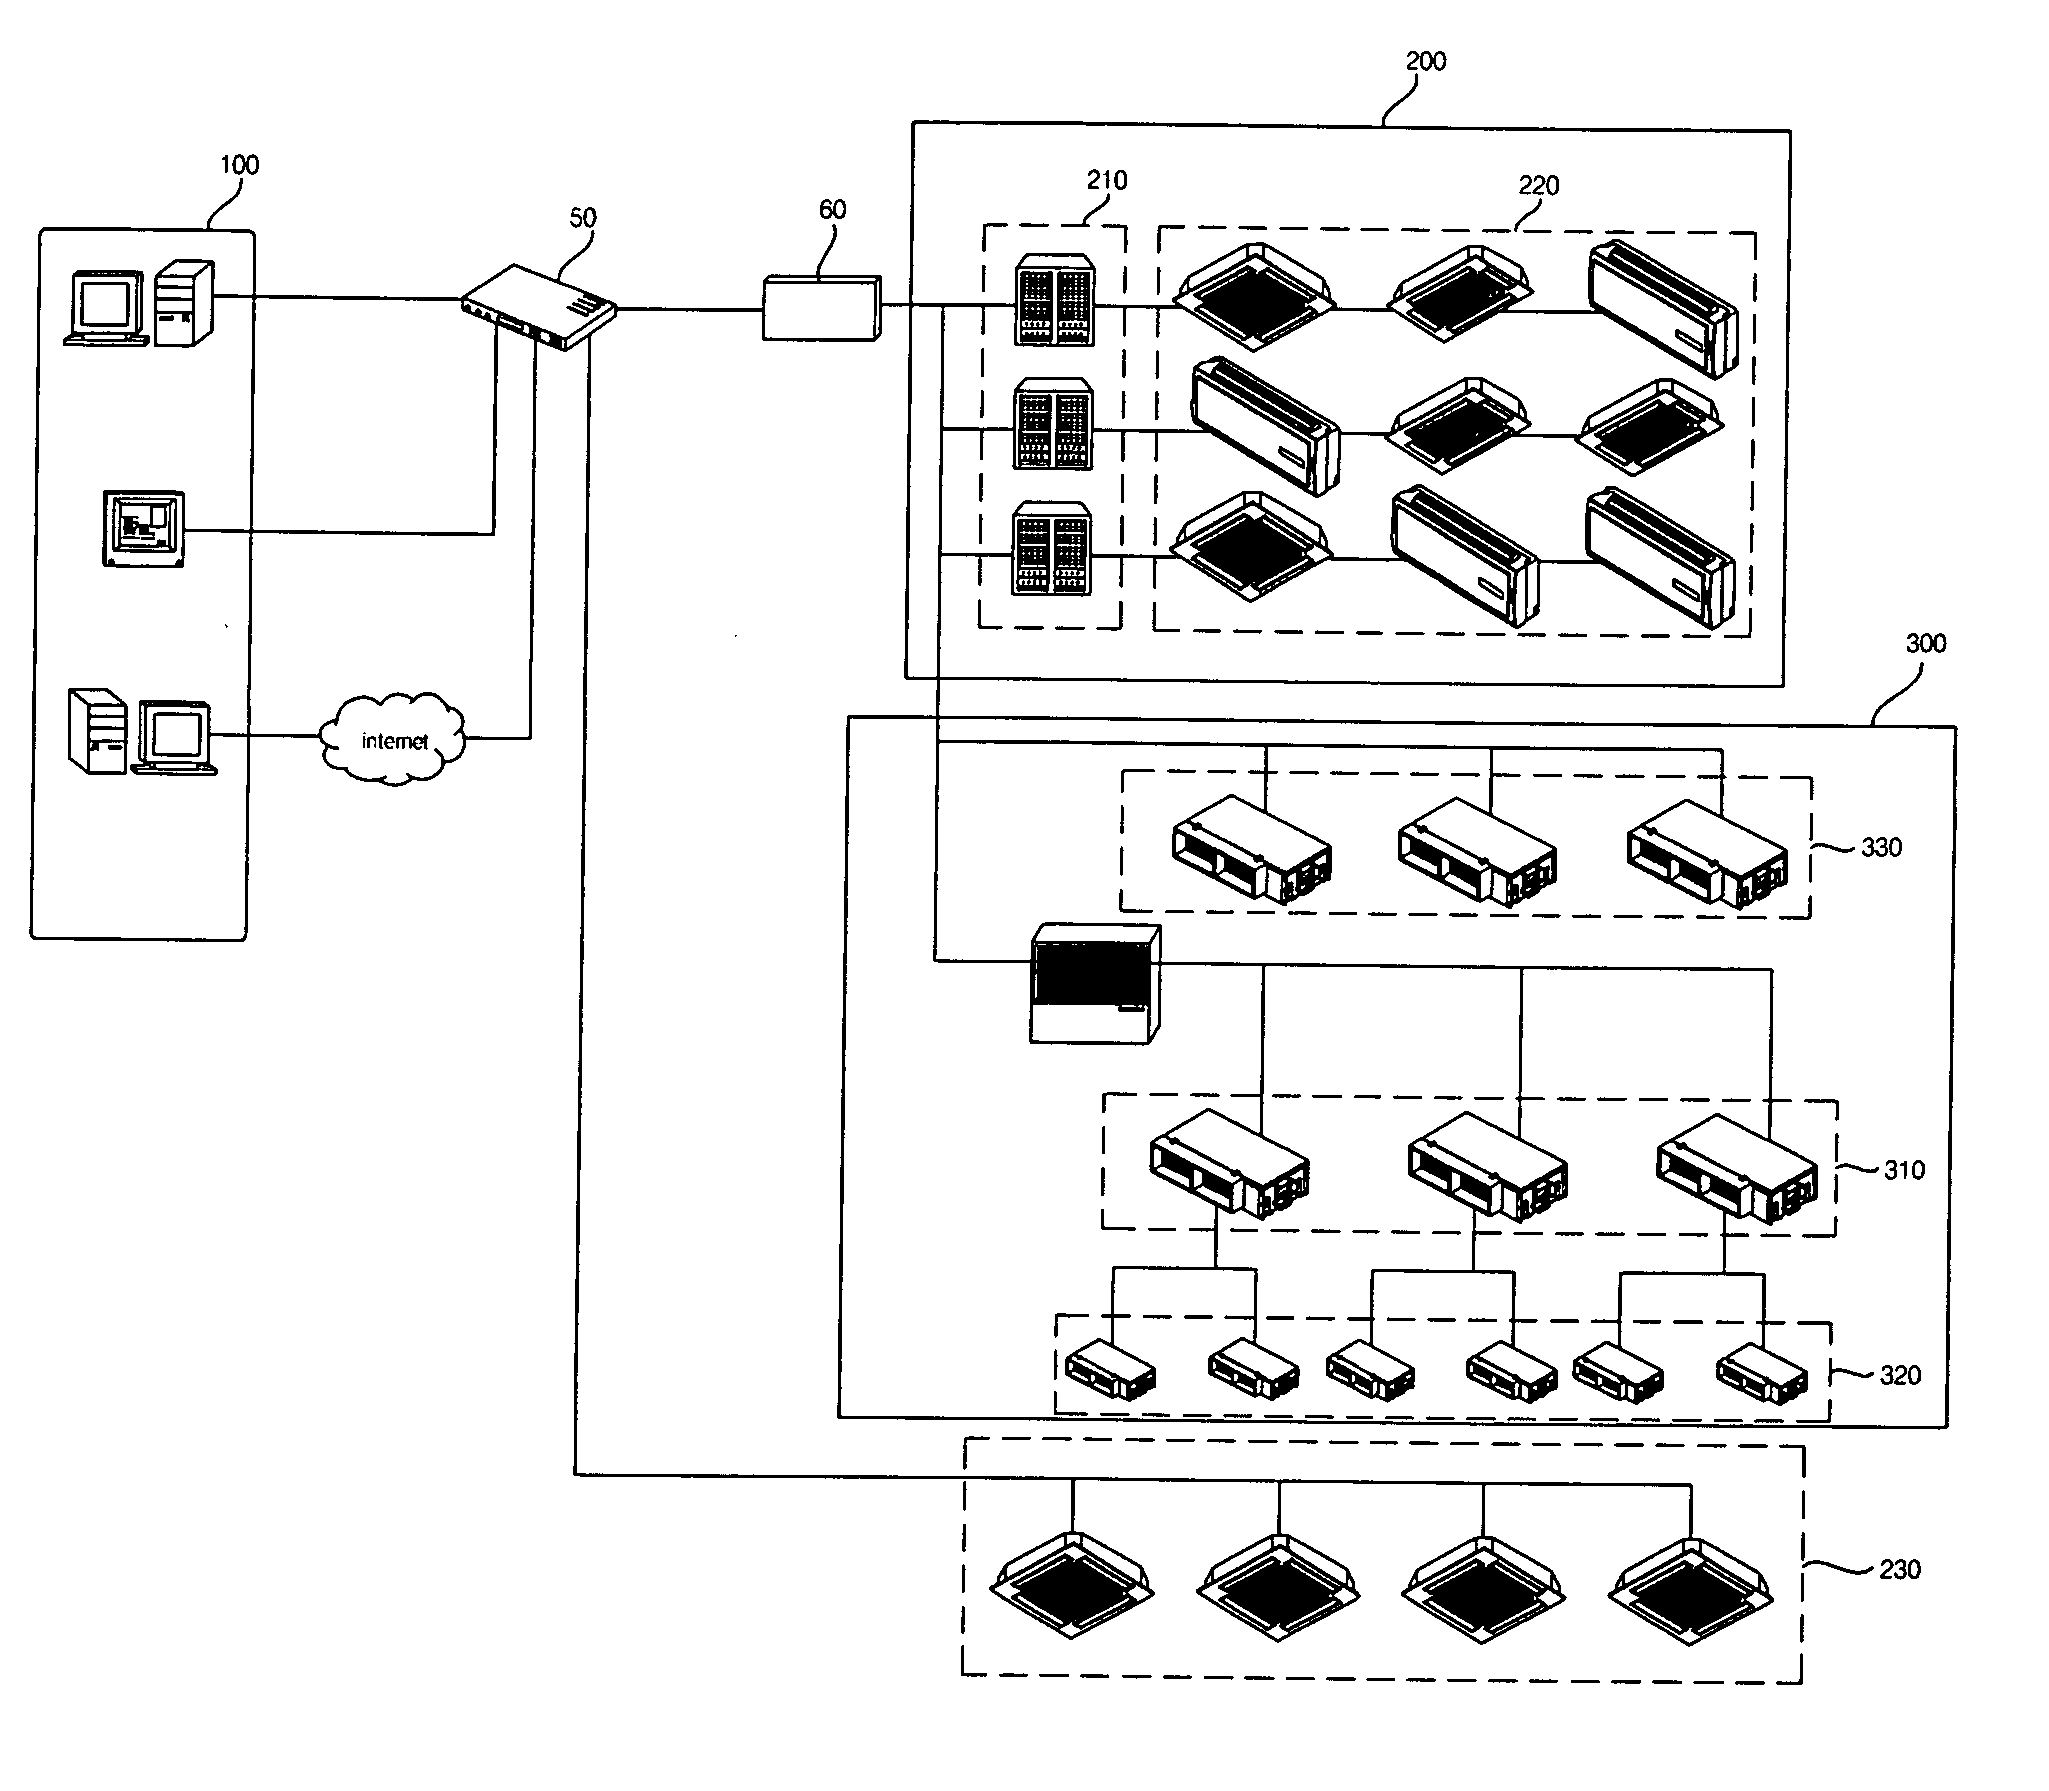 Multi-air conditioner central control system